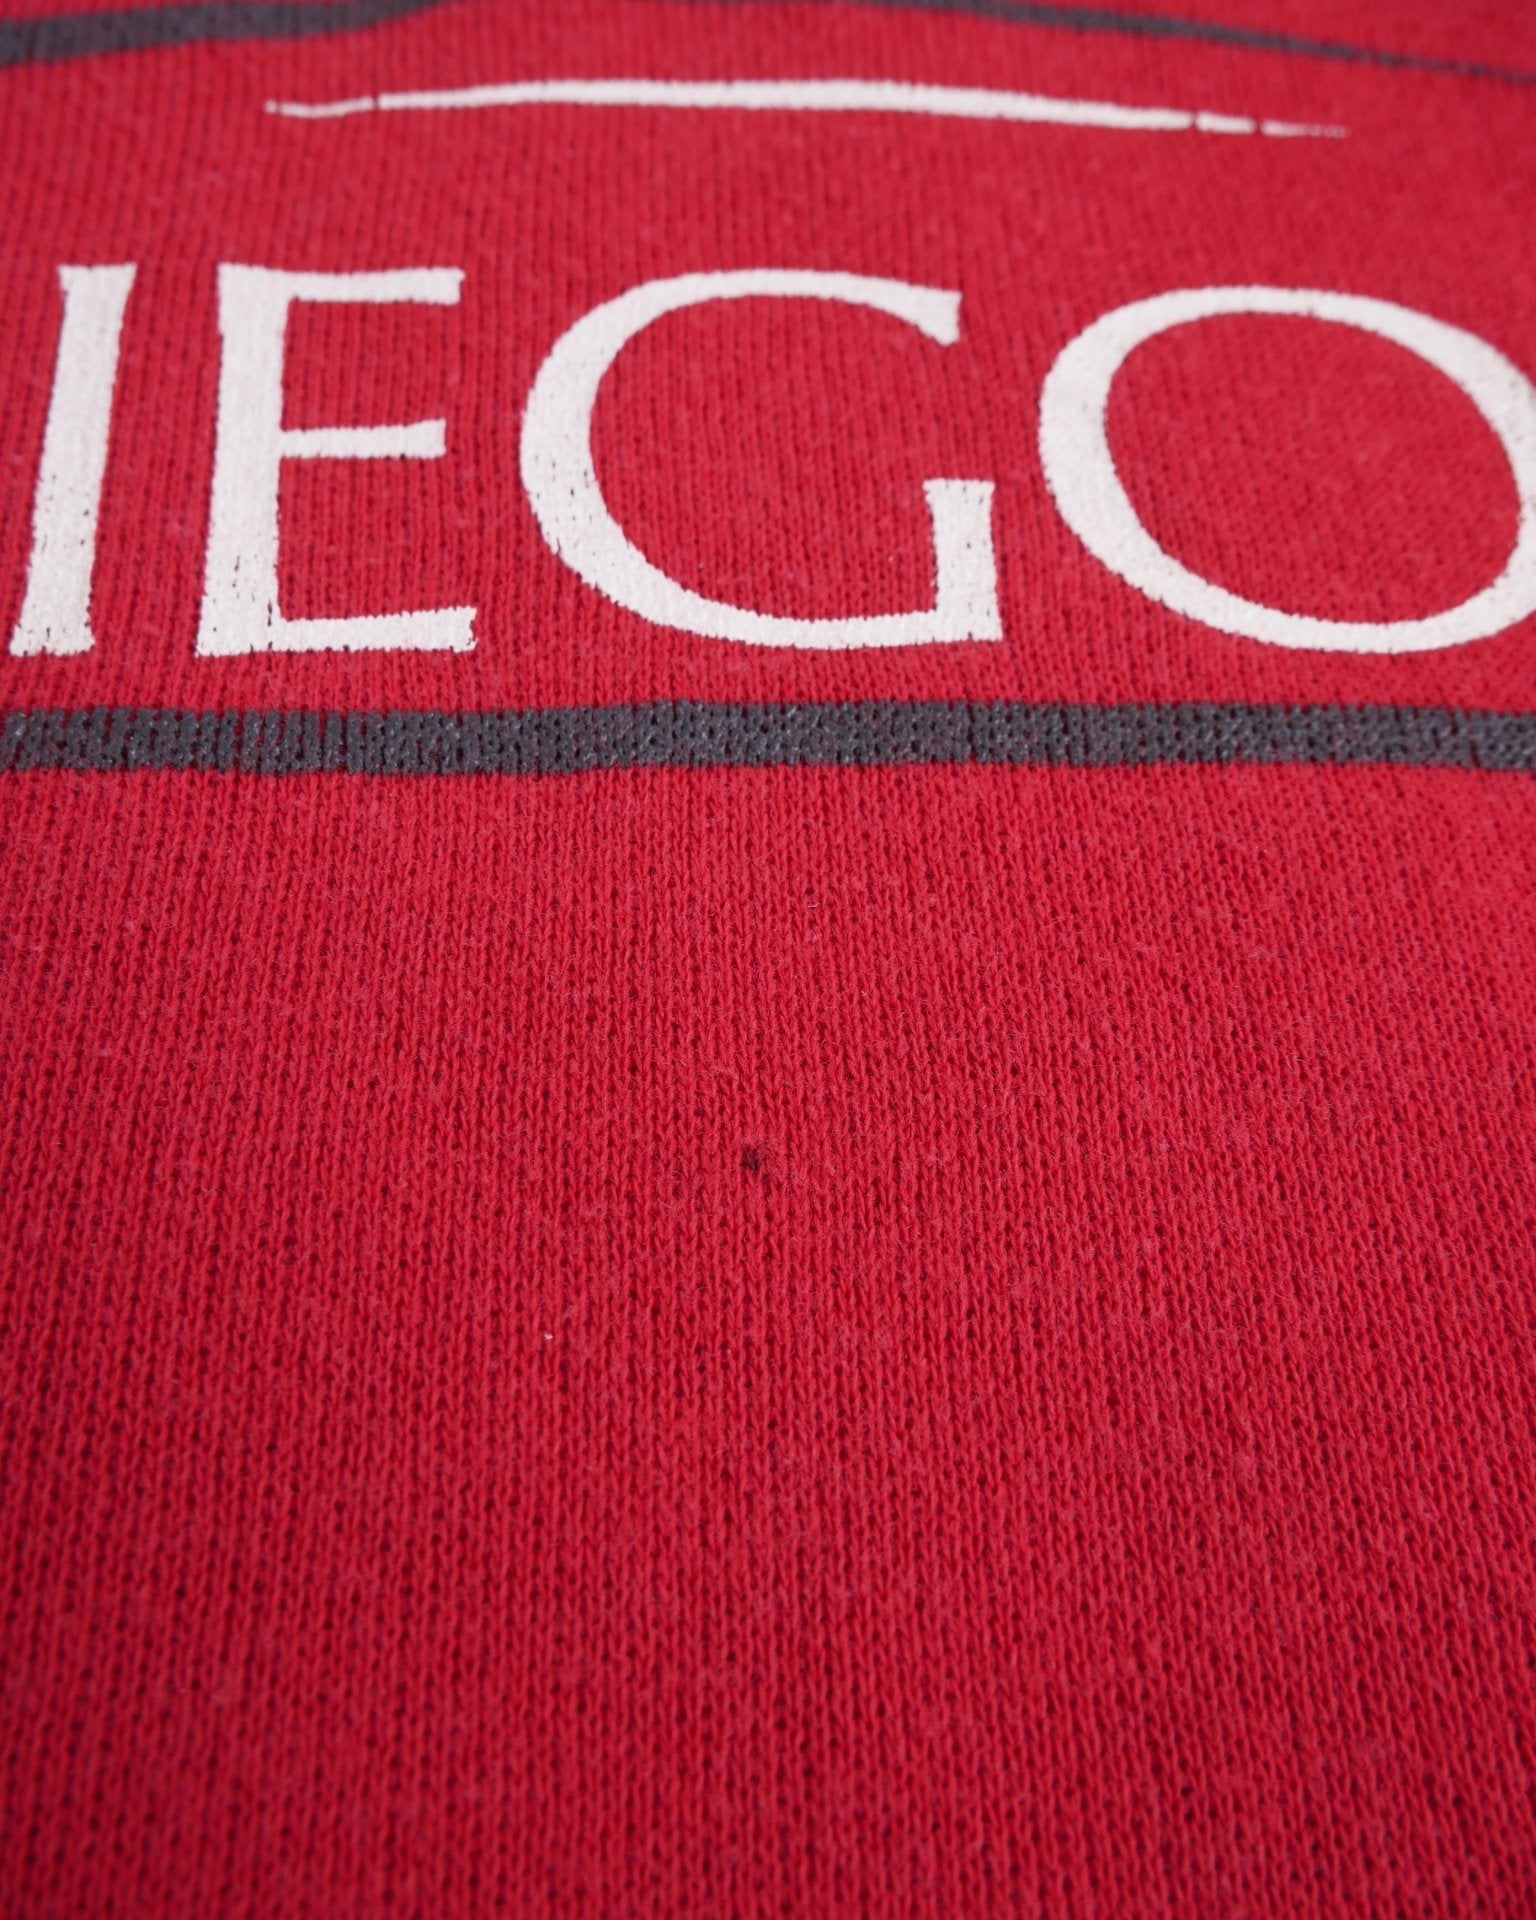 'San Diego' printed Graphic red Vintage Sweater - Peeces